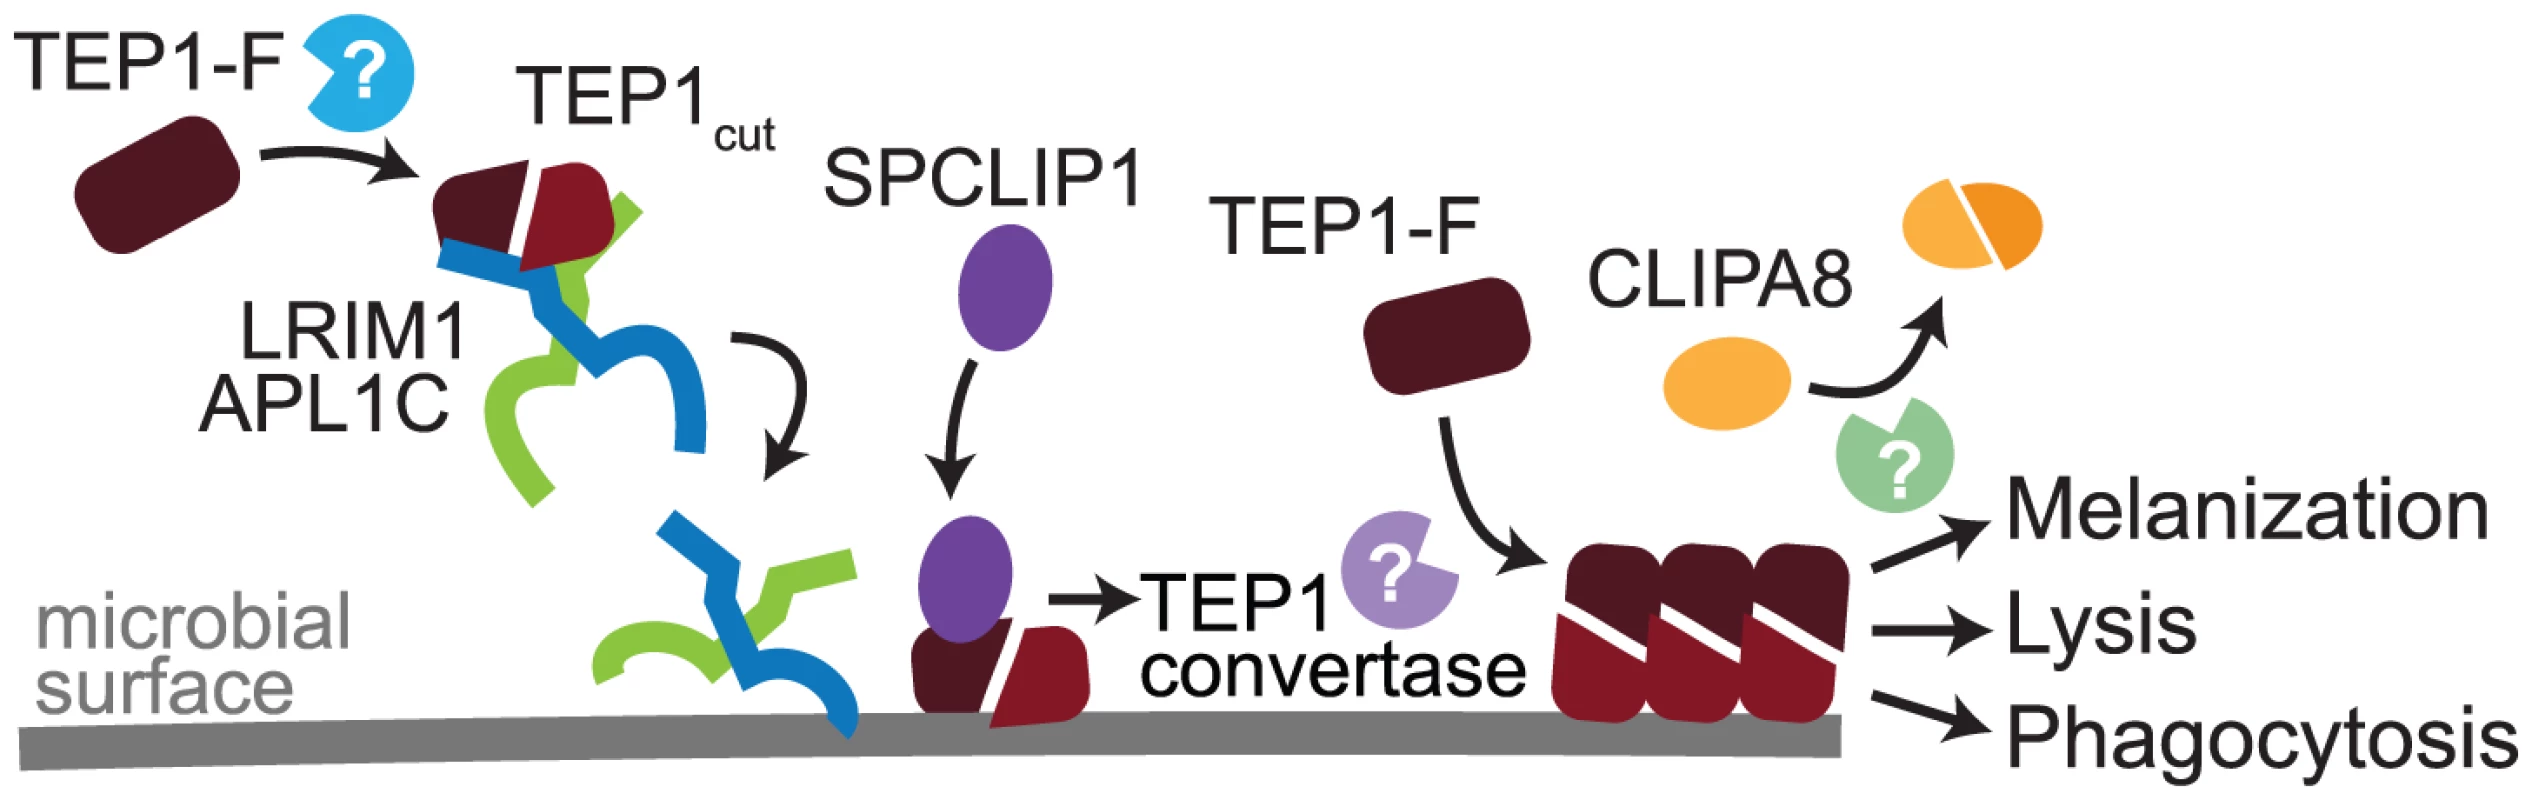 Model of TEP1 convertase formation.